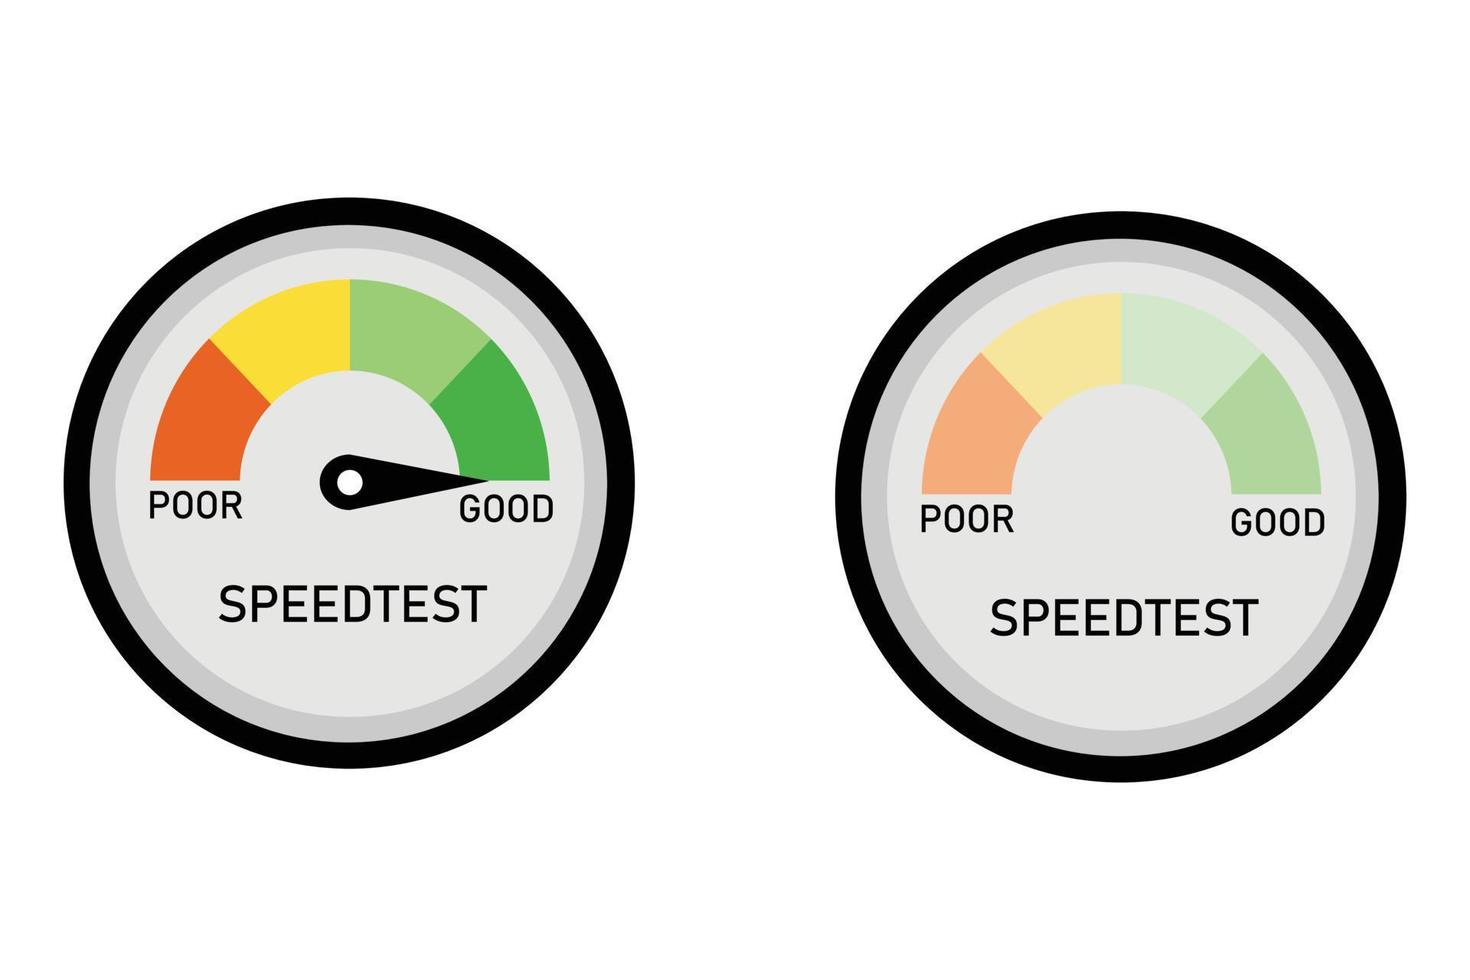 Internet speed meter illustration in Vector format. Suitable to be used as a design element for internet speed, network quality, internet connection performance. Available with and without pointer